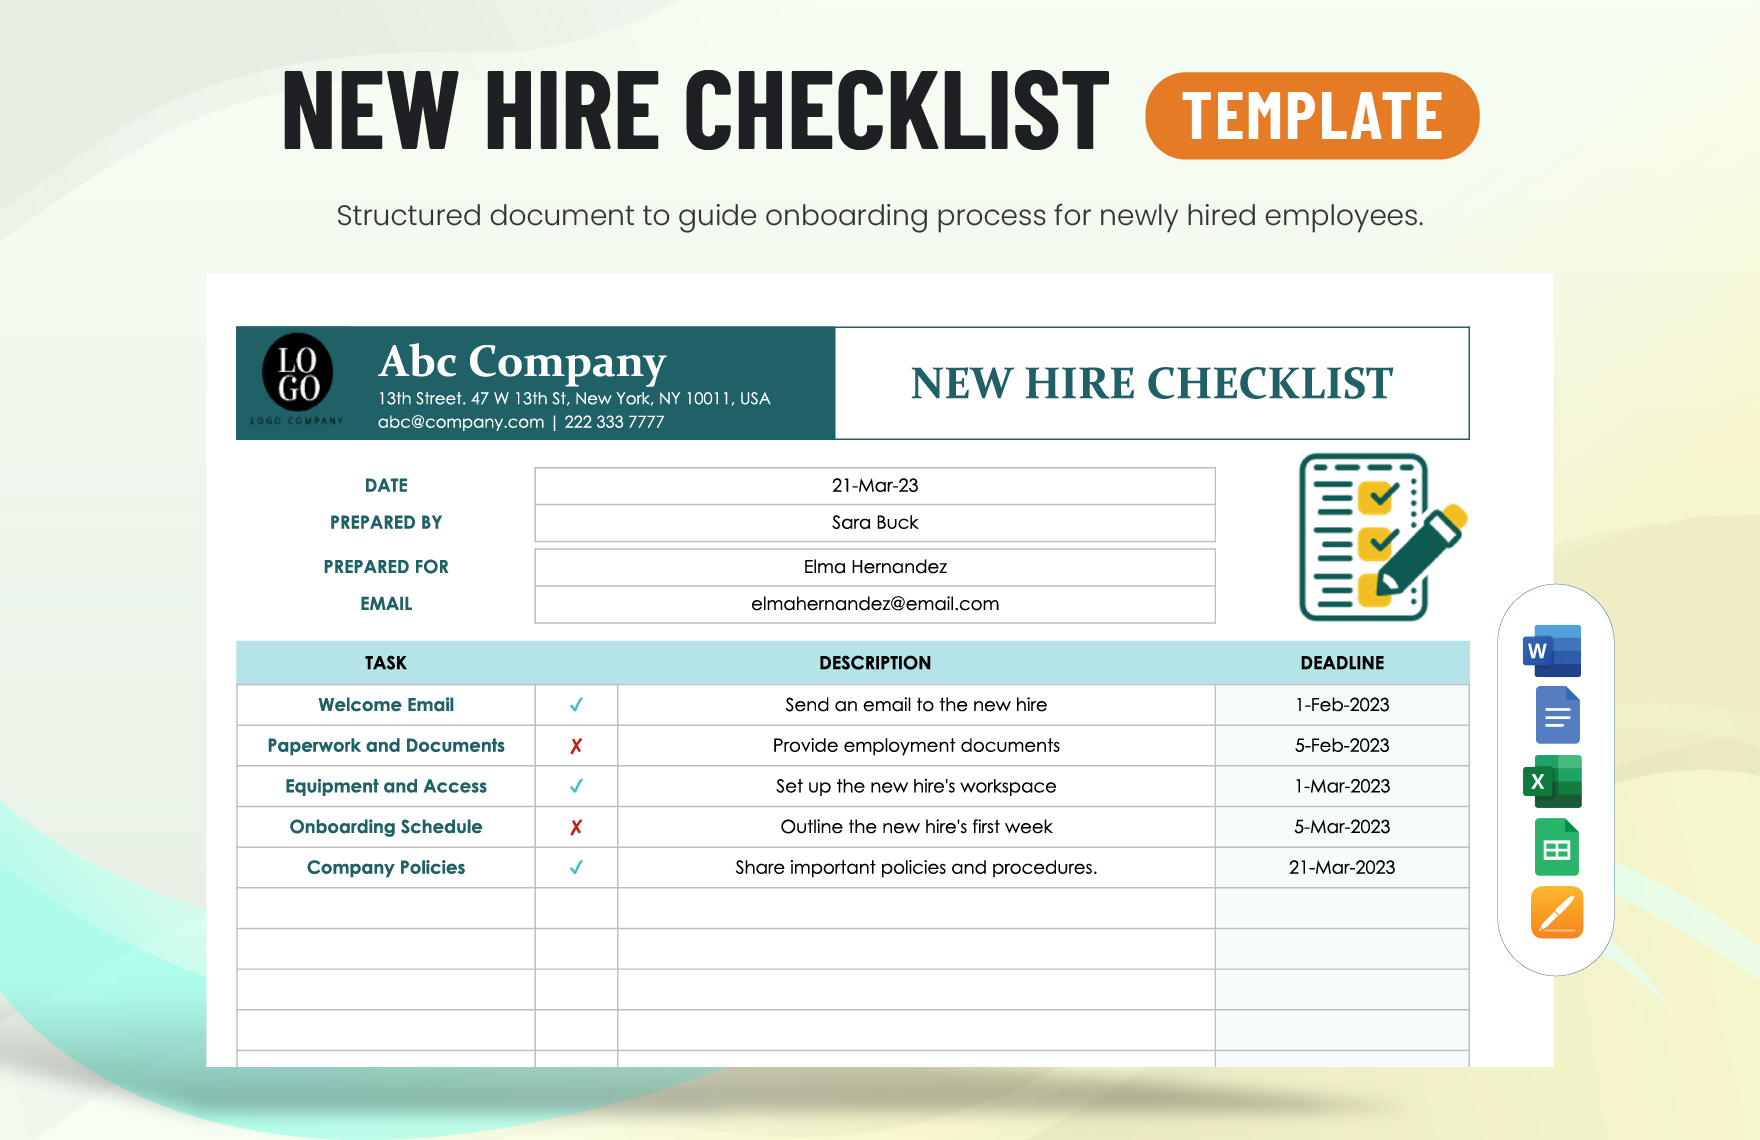 New Hire Checklist Template in Word, Google Docs, Excel, Google Sheets, Apple Pages